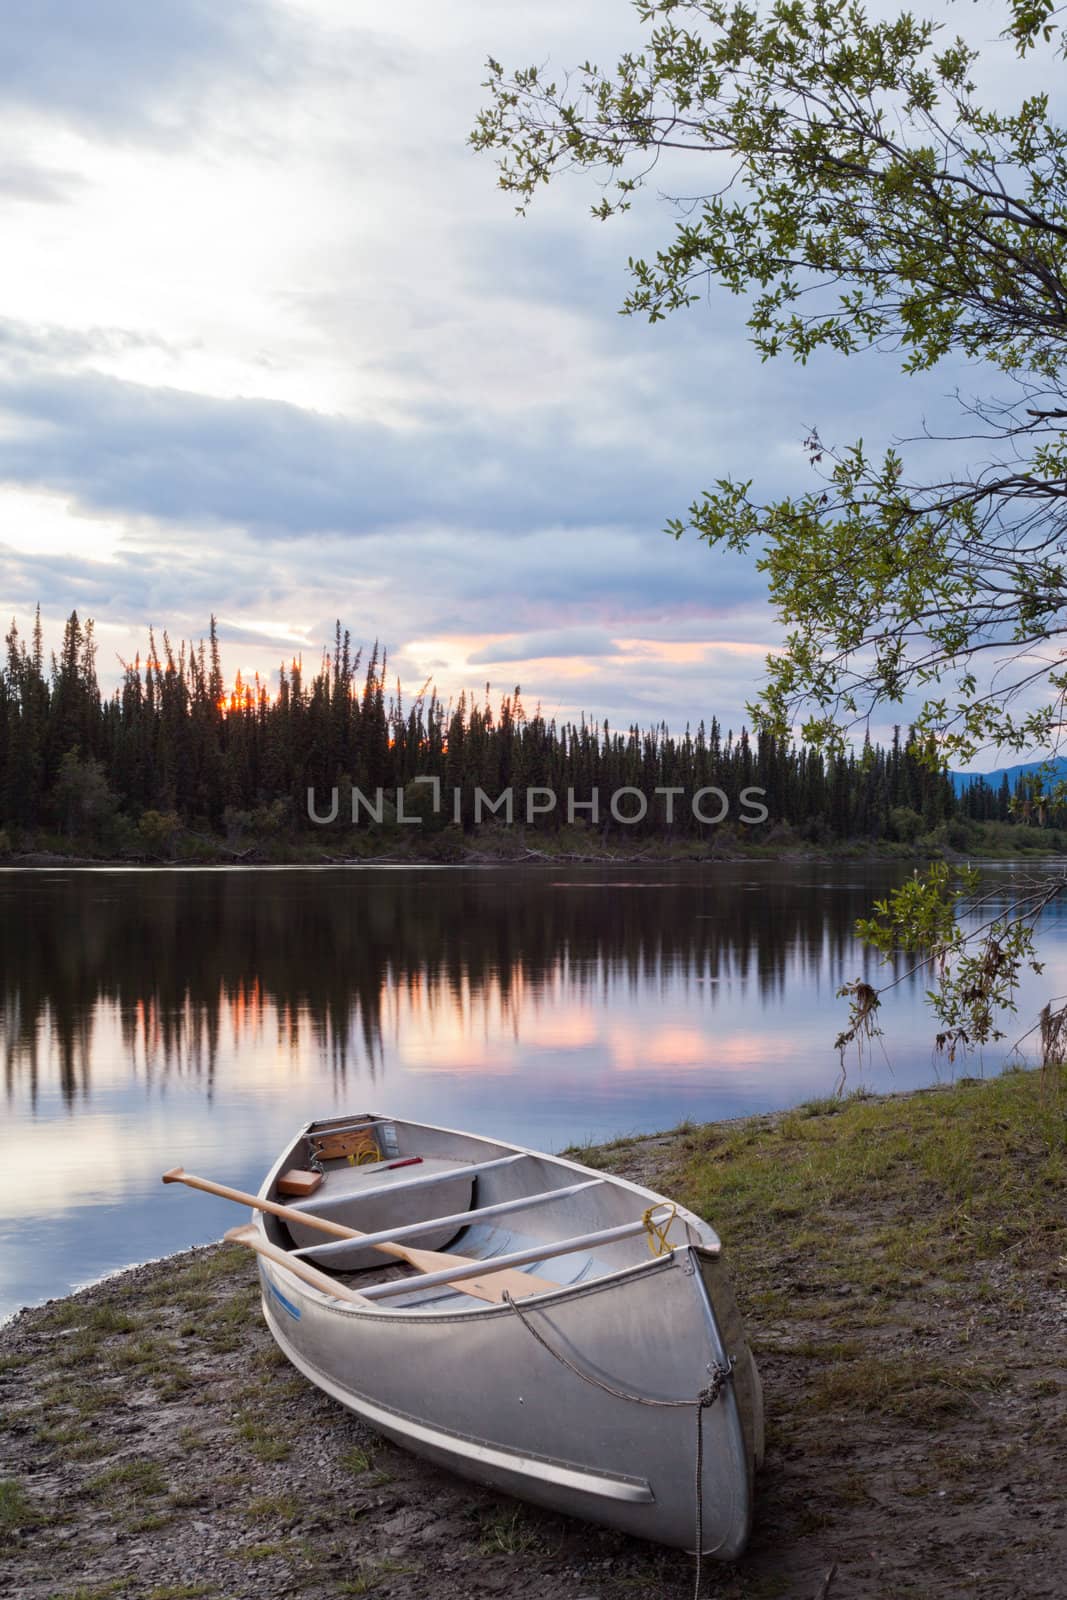 Sunset sky and canoe at Teslin River Yukon Canada by PiLens